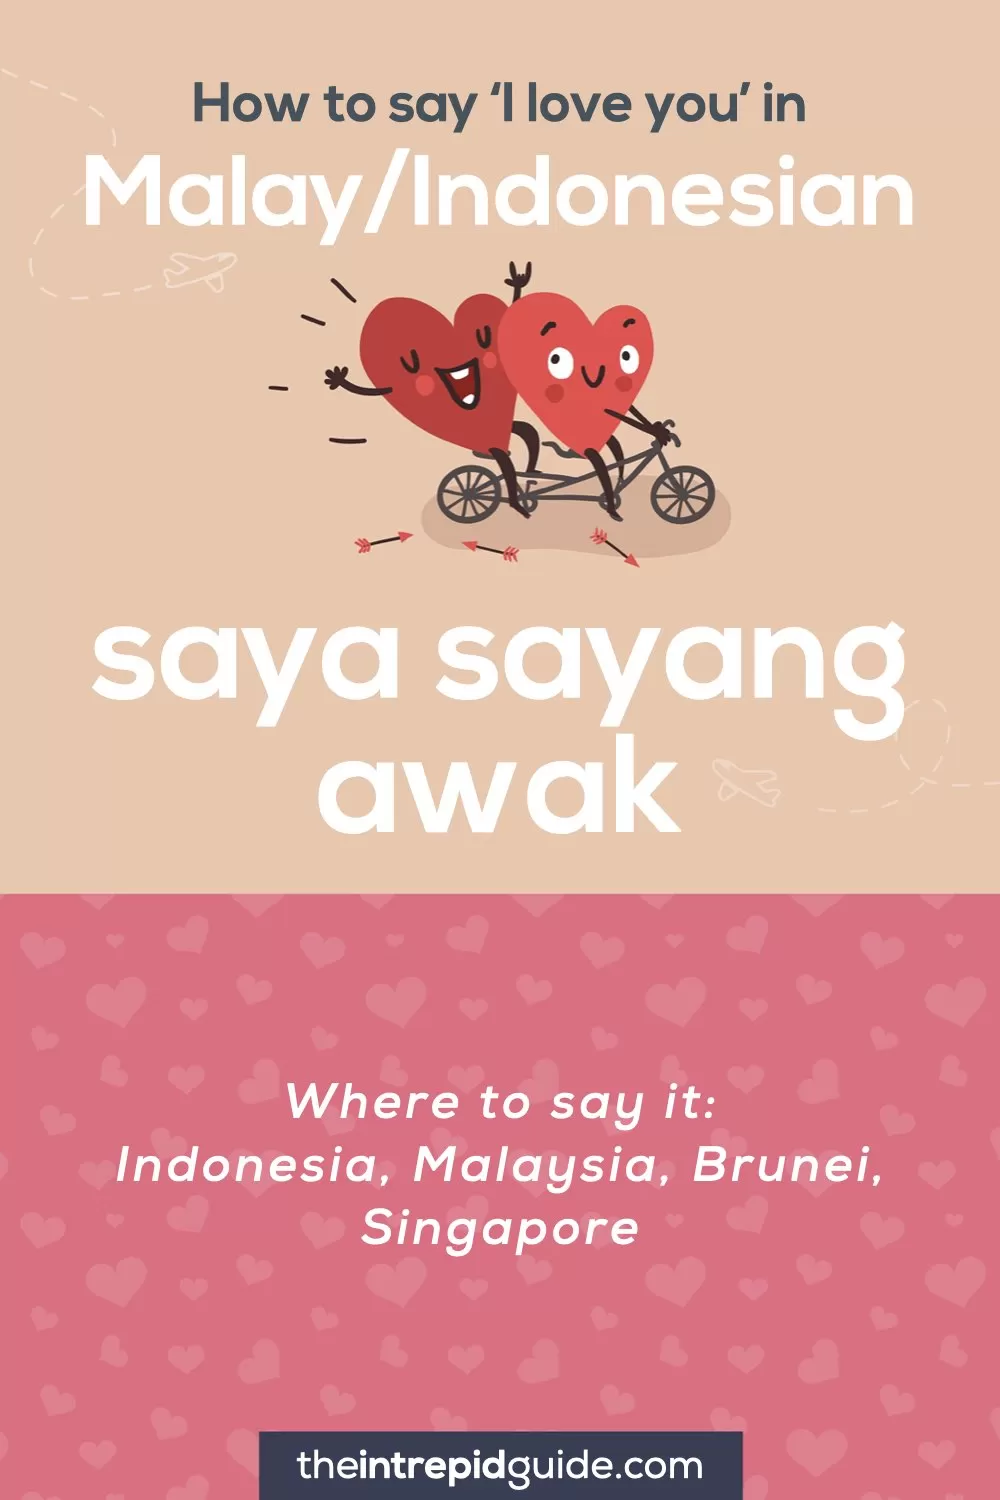 How to say I love you in different languages - Malay - Indonesian - saya sayang awak